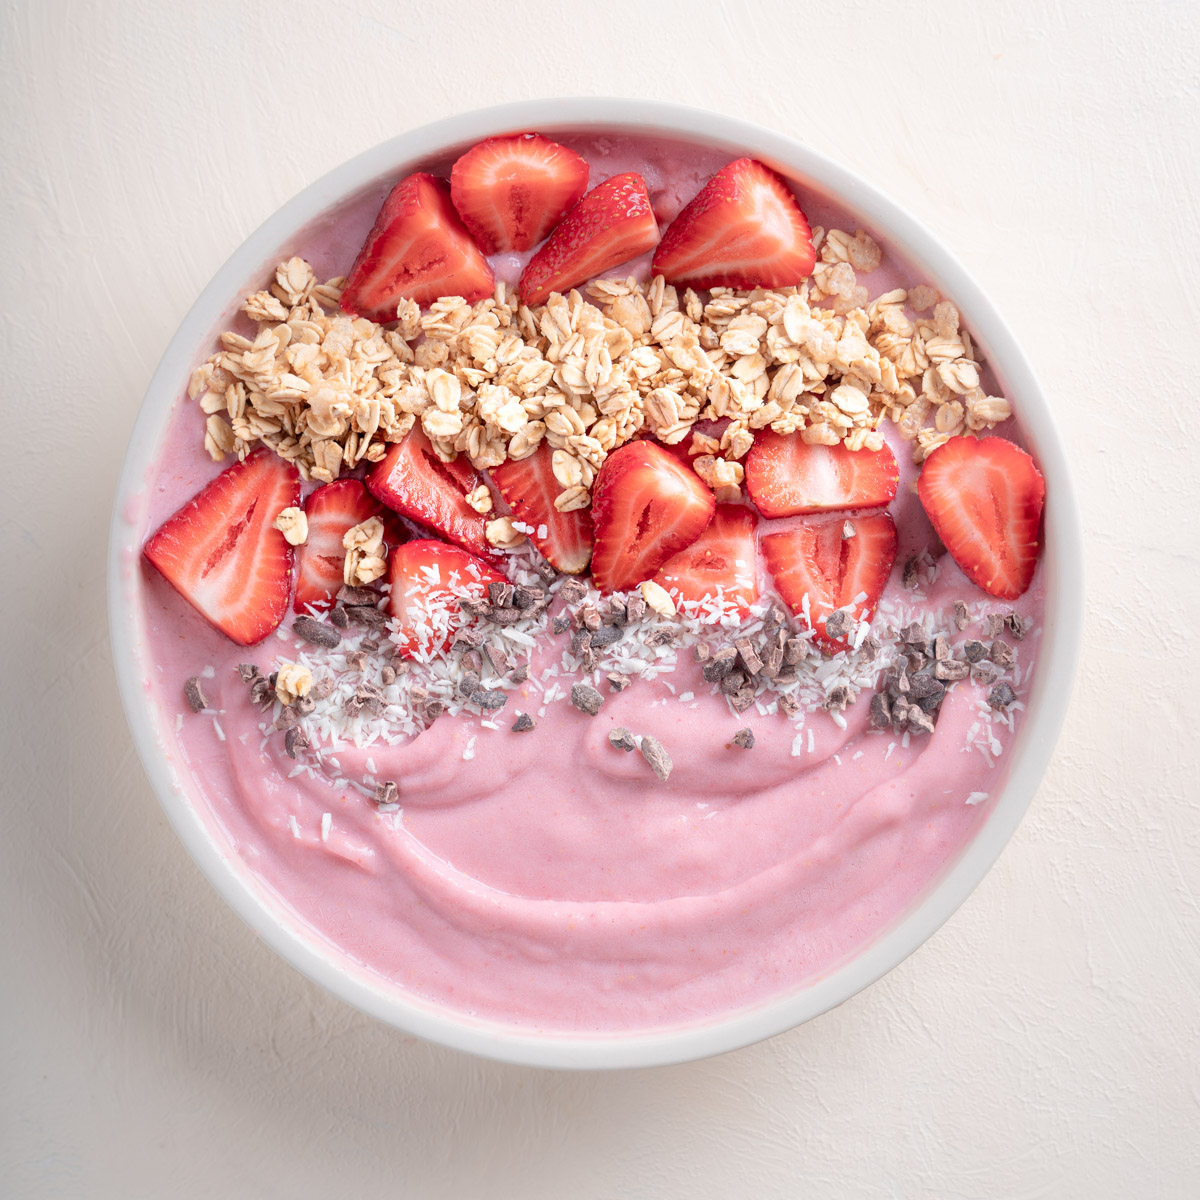 Strawberry Smoothie Bowl with toppings such as granola , sliced strawberries, coconut flakes, and cocoa nibs. Placed on a plain eggshell white back drop.